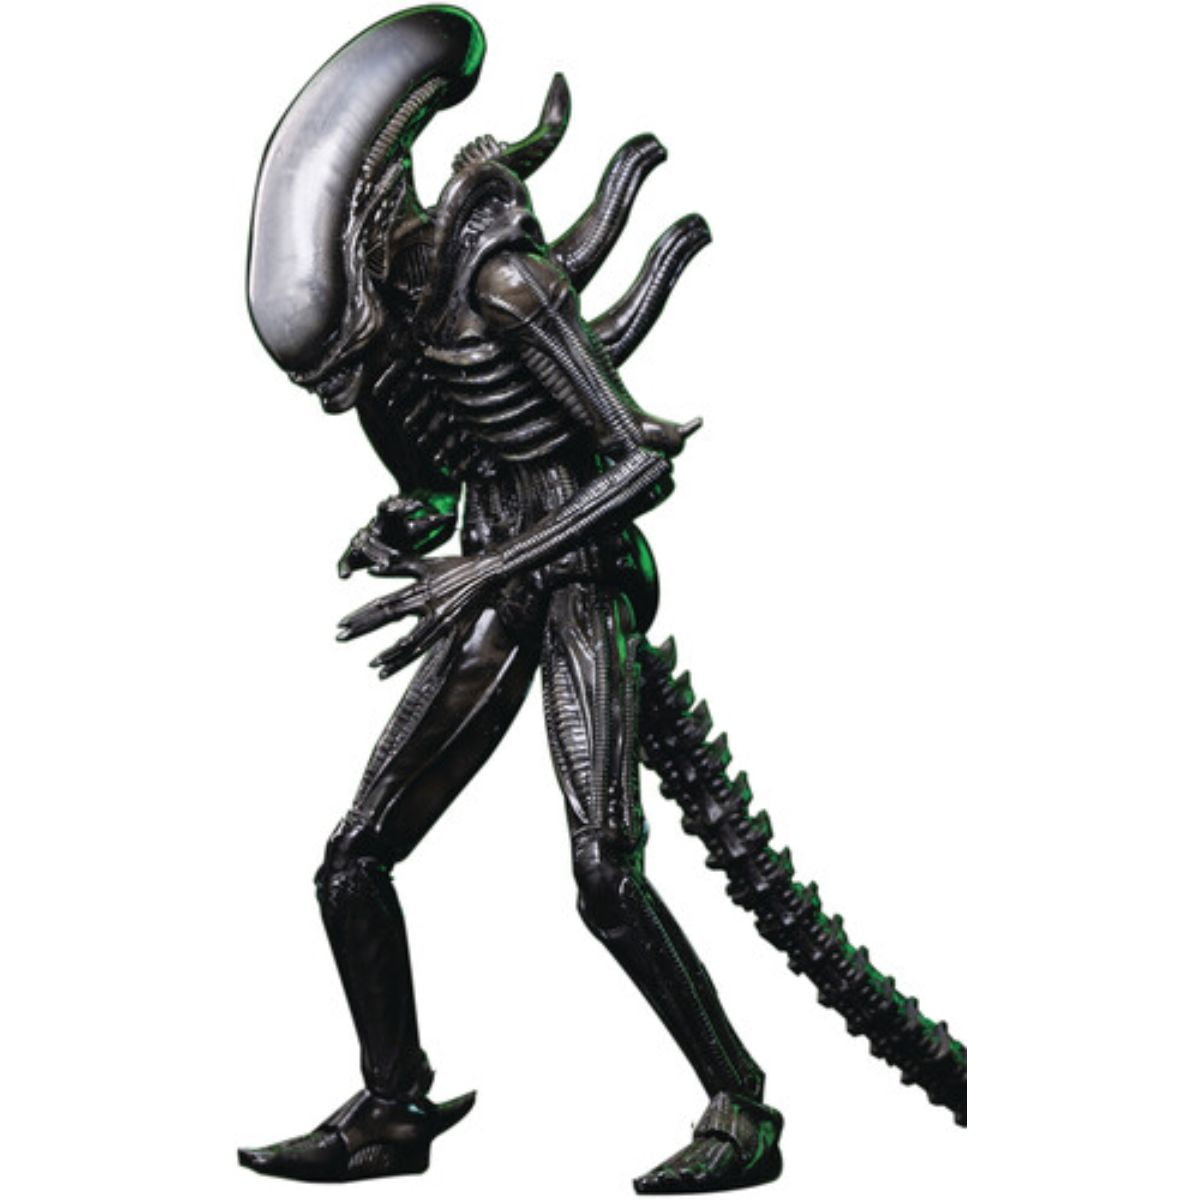 Treasure X Aliens Action Assembly Figures Toys Model For Boy&Gril